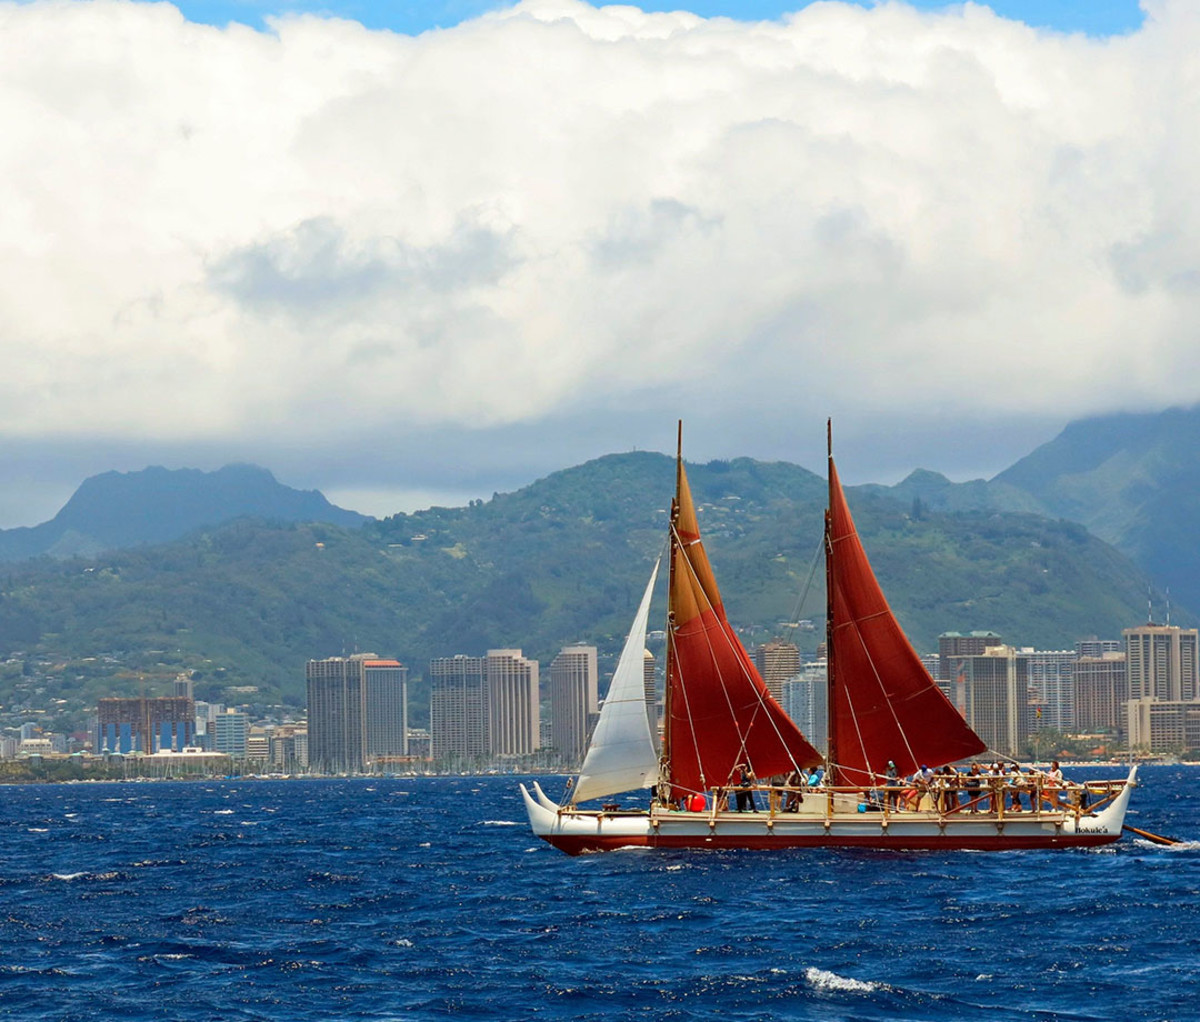 The Hōkūleʻa sets off from Honolulu in April 2014